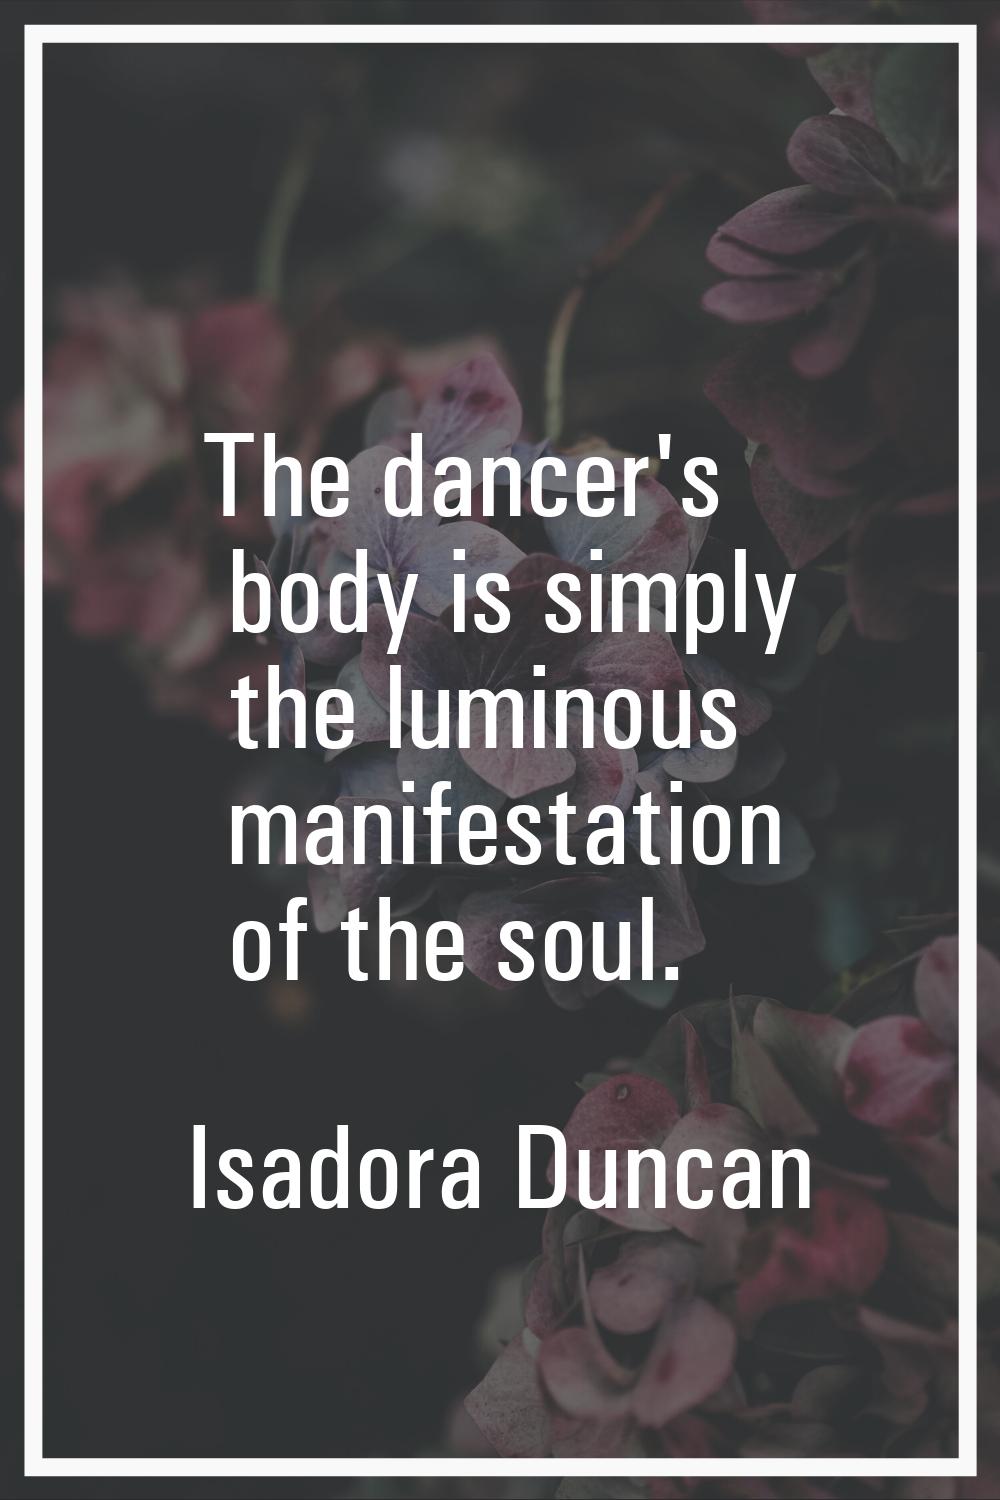 The dancer's body is simply the luminous manifestation of the soul.